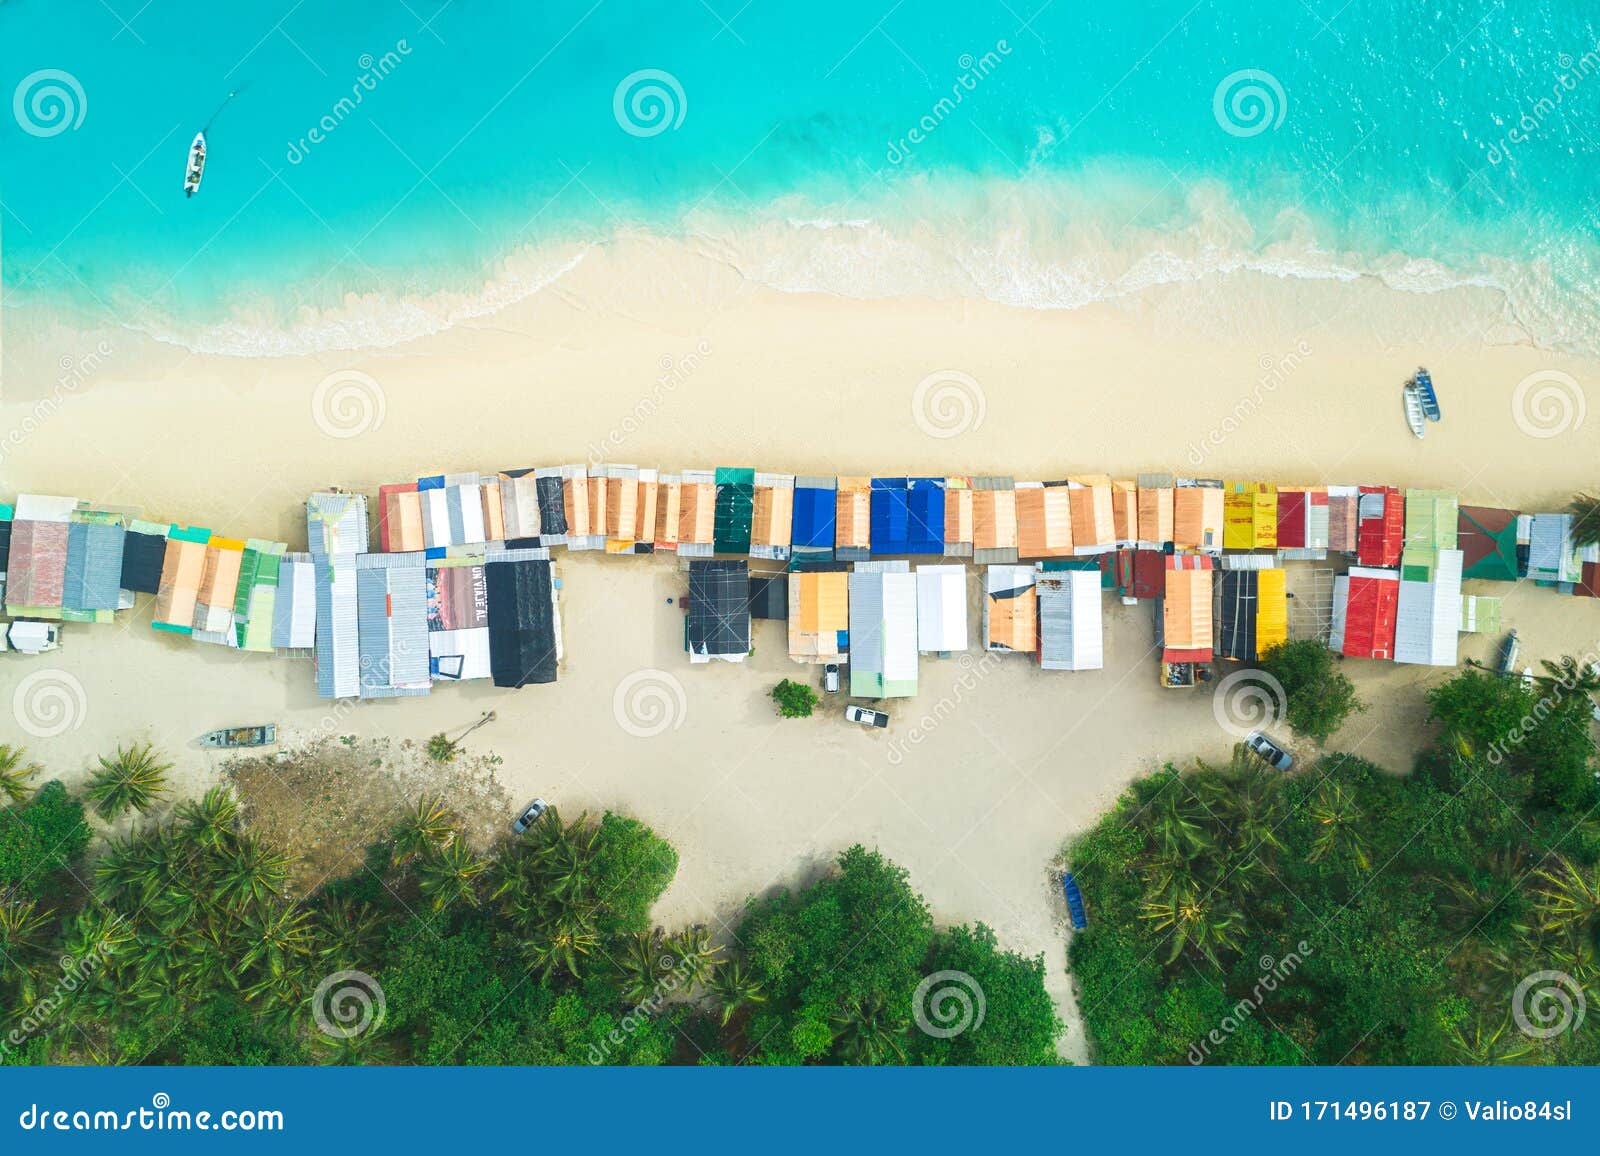 aerial view of shopping center at the tropical beach in punta cana, dominican republic